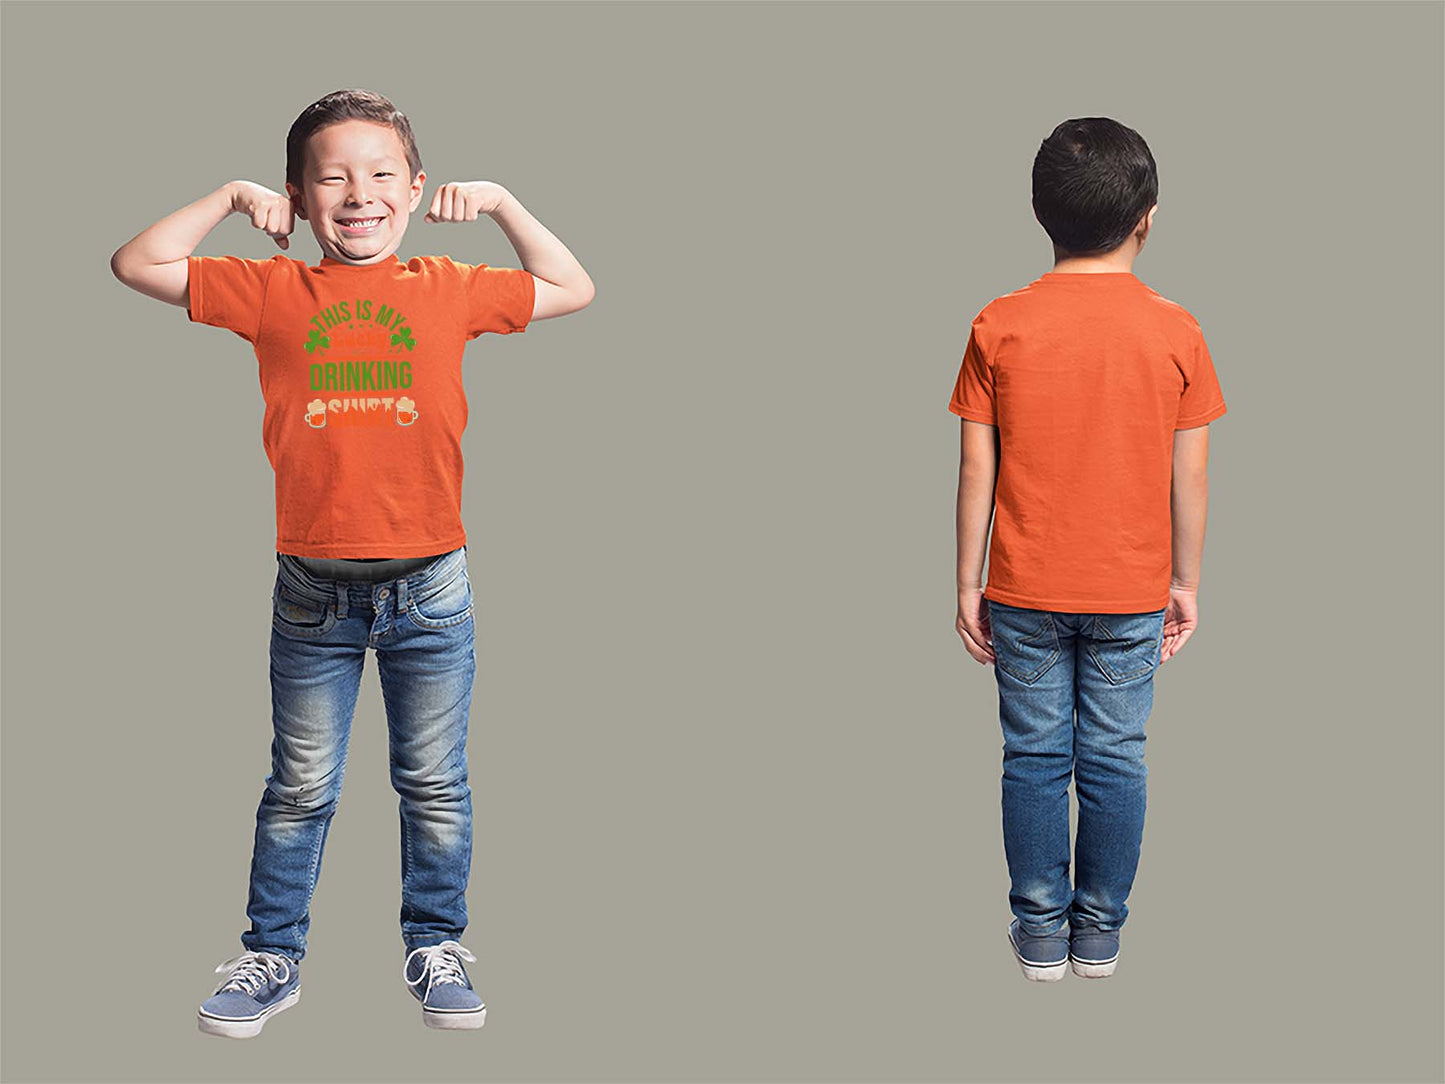 Lucky Drinking Shirt Youth T-Shirt Youth Small Orange